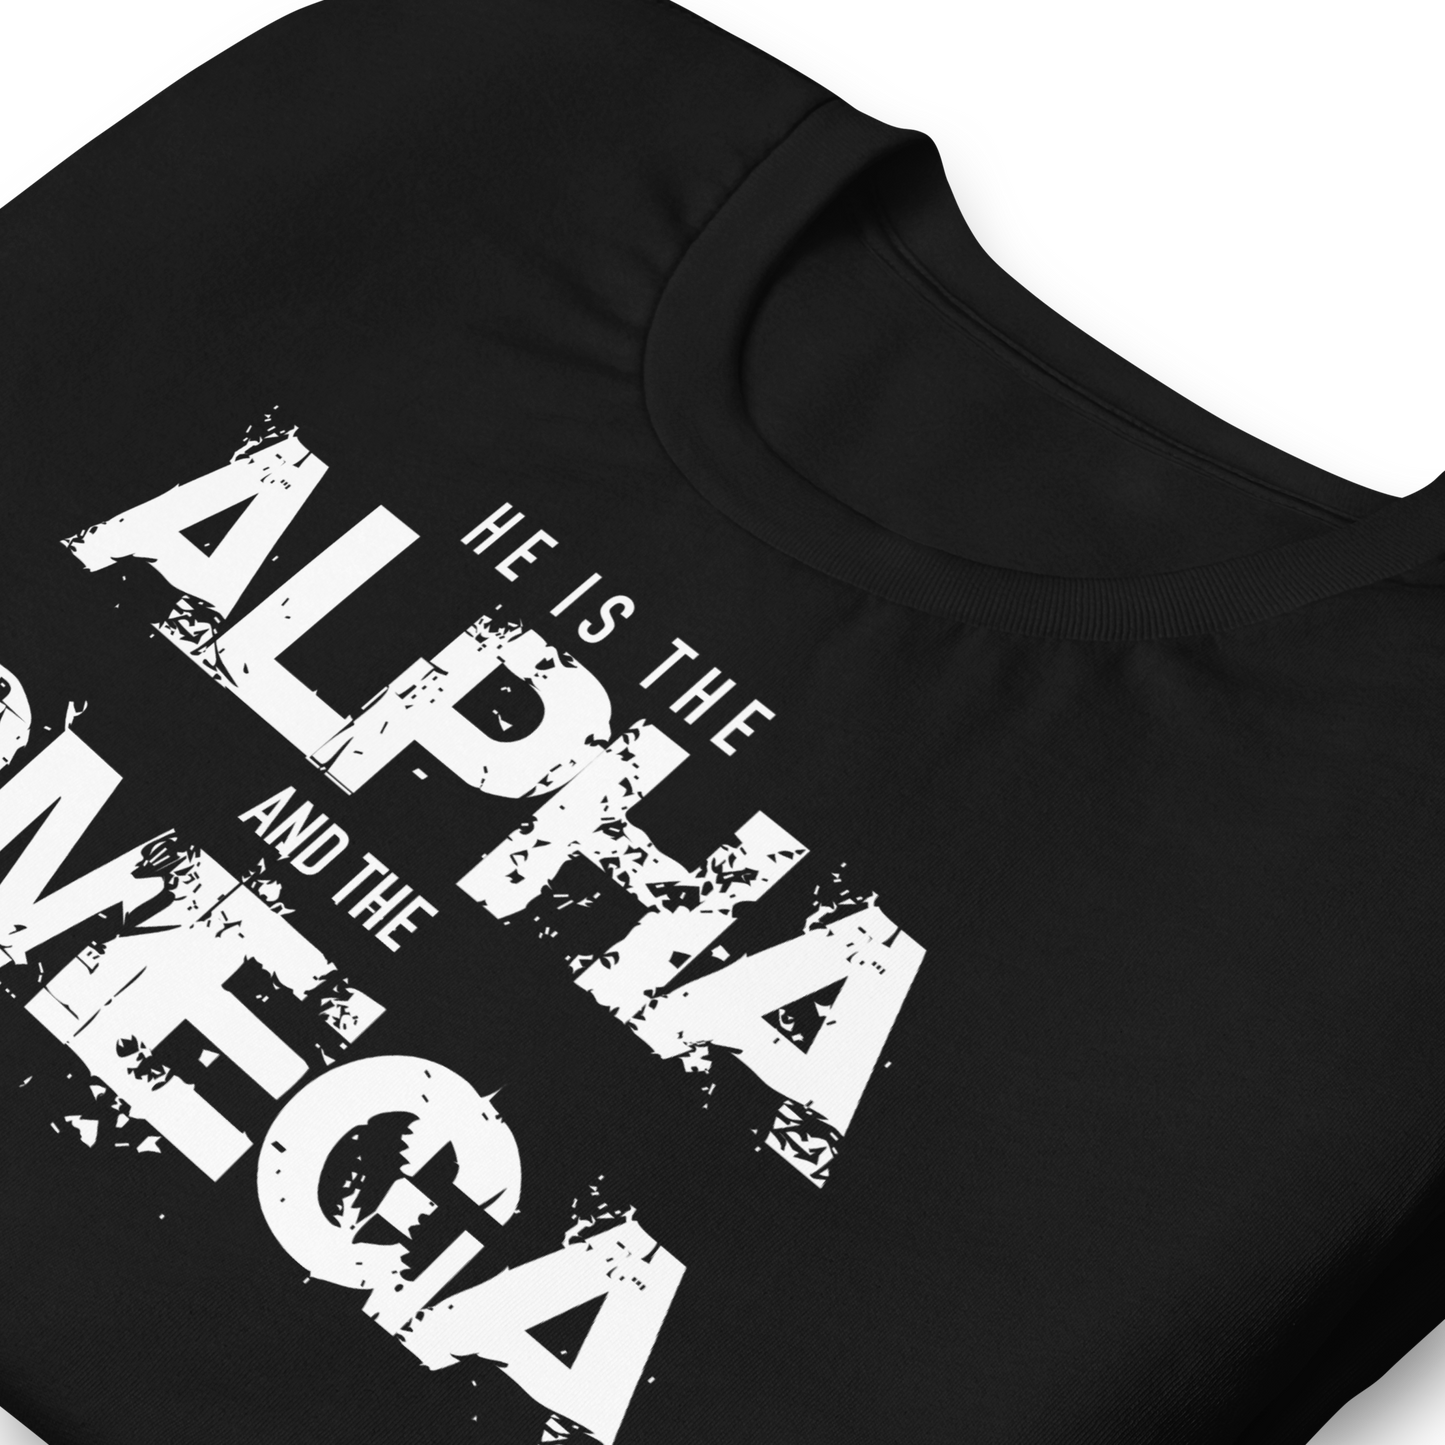 Unisex - Christian - He is the Alpha and the Omega - T-shirt